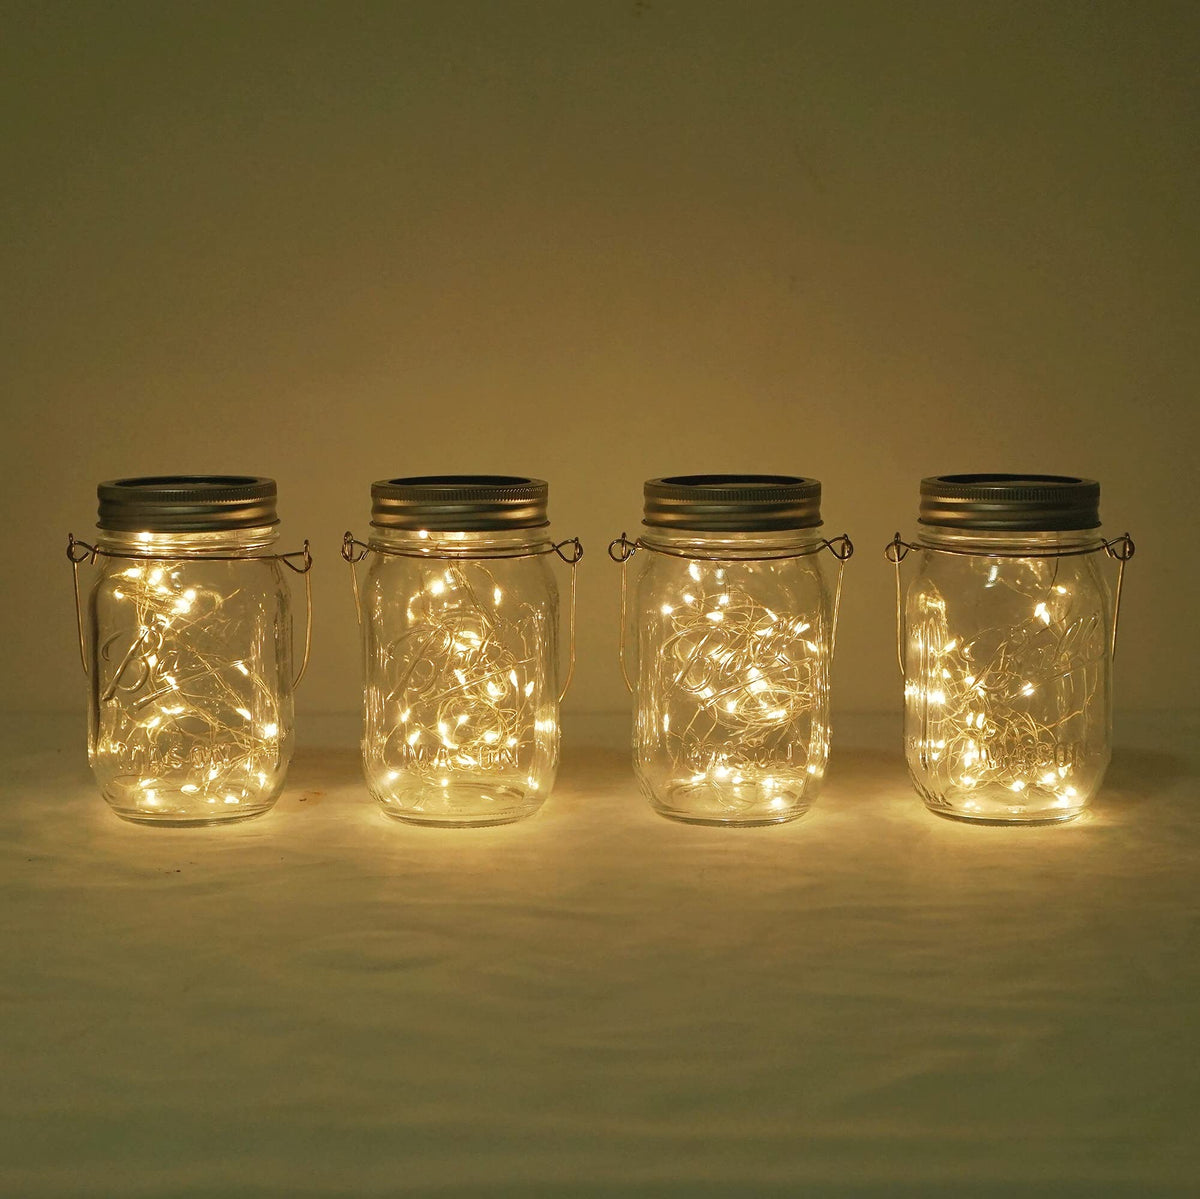 Decorman Solar Mason Jar Lights, 12 Pack 30 LED Fairy Star Firefly String  Lids Lights with 12 Hangers for Patio Yard Garden Party Wedding Christmas  Decoration(Jars Not Included) (12 Pack, Colorful) 